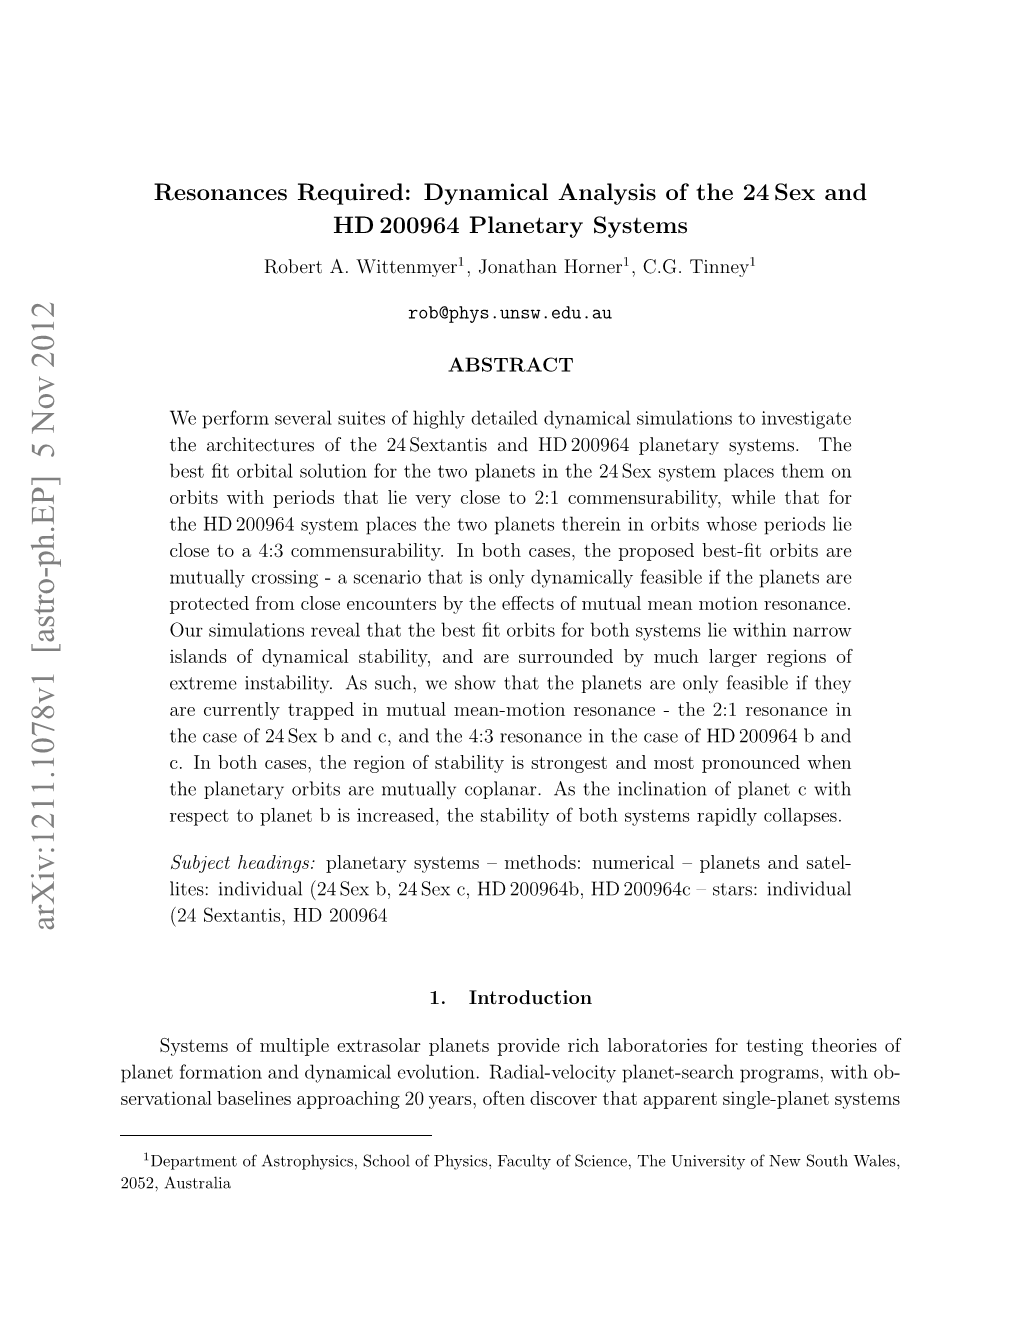 Resonances Required: Dynamical Analysis of the 24 Sex and HD